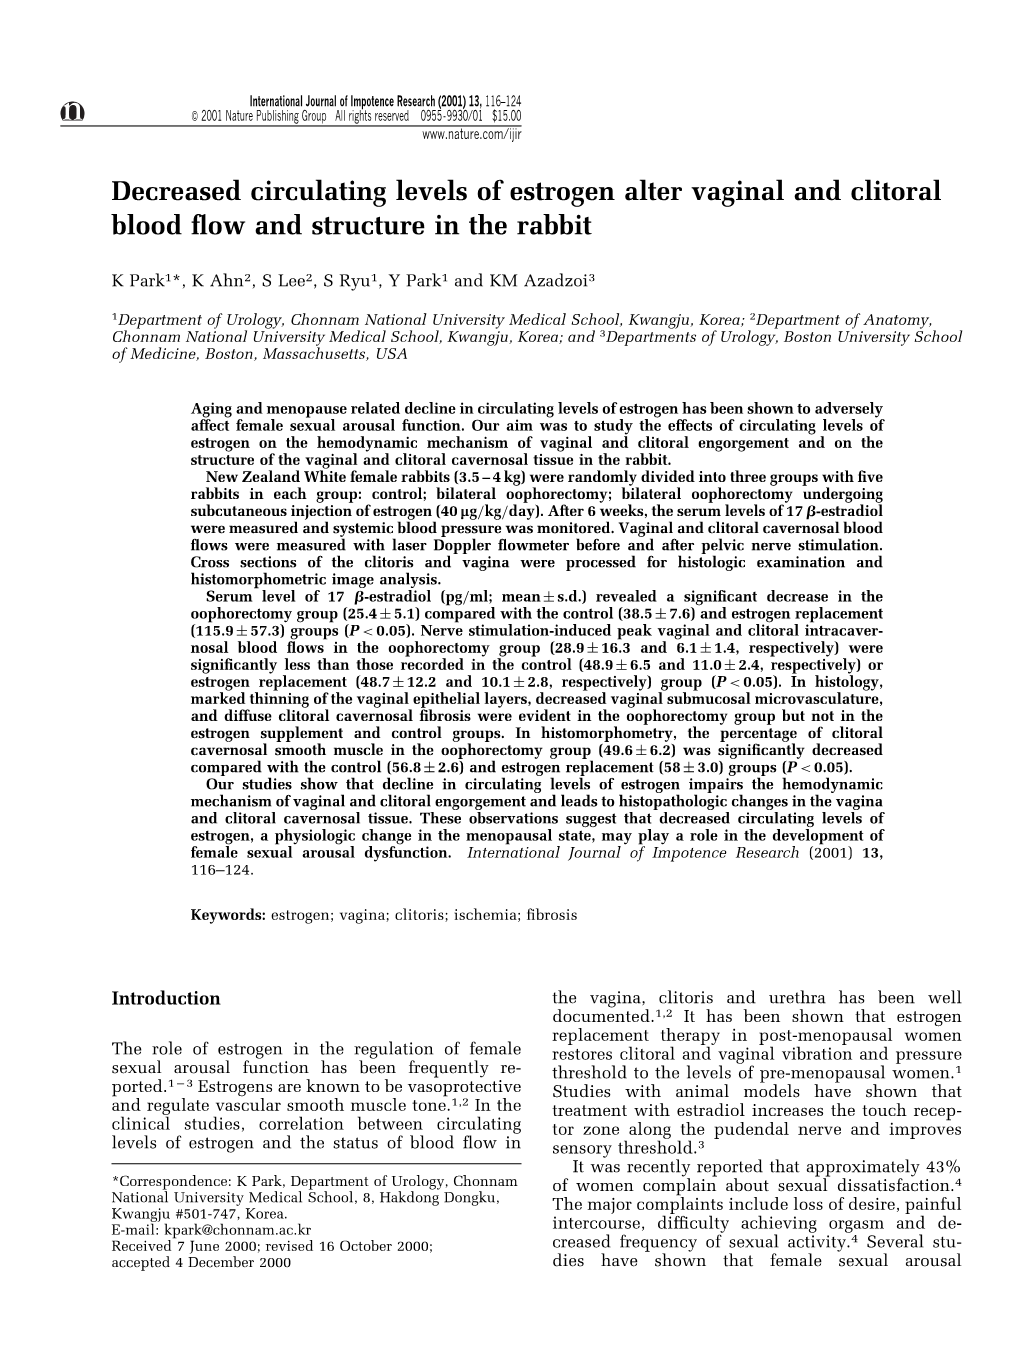 Decreased Circulating Levels of Estrogen Alter Vaginal and Clitoral Blood ¯Ow and Structure in the Rabbit